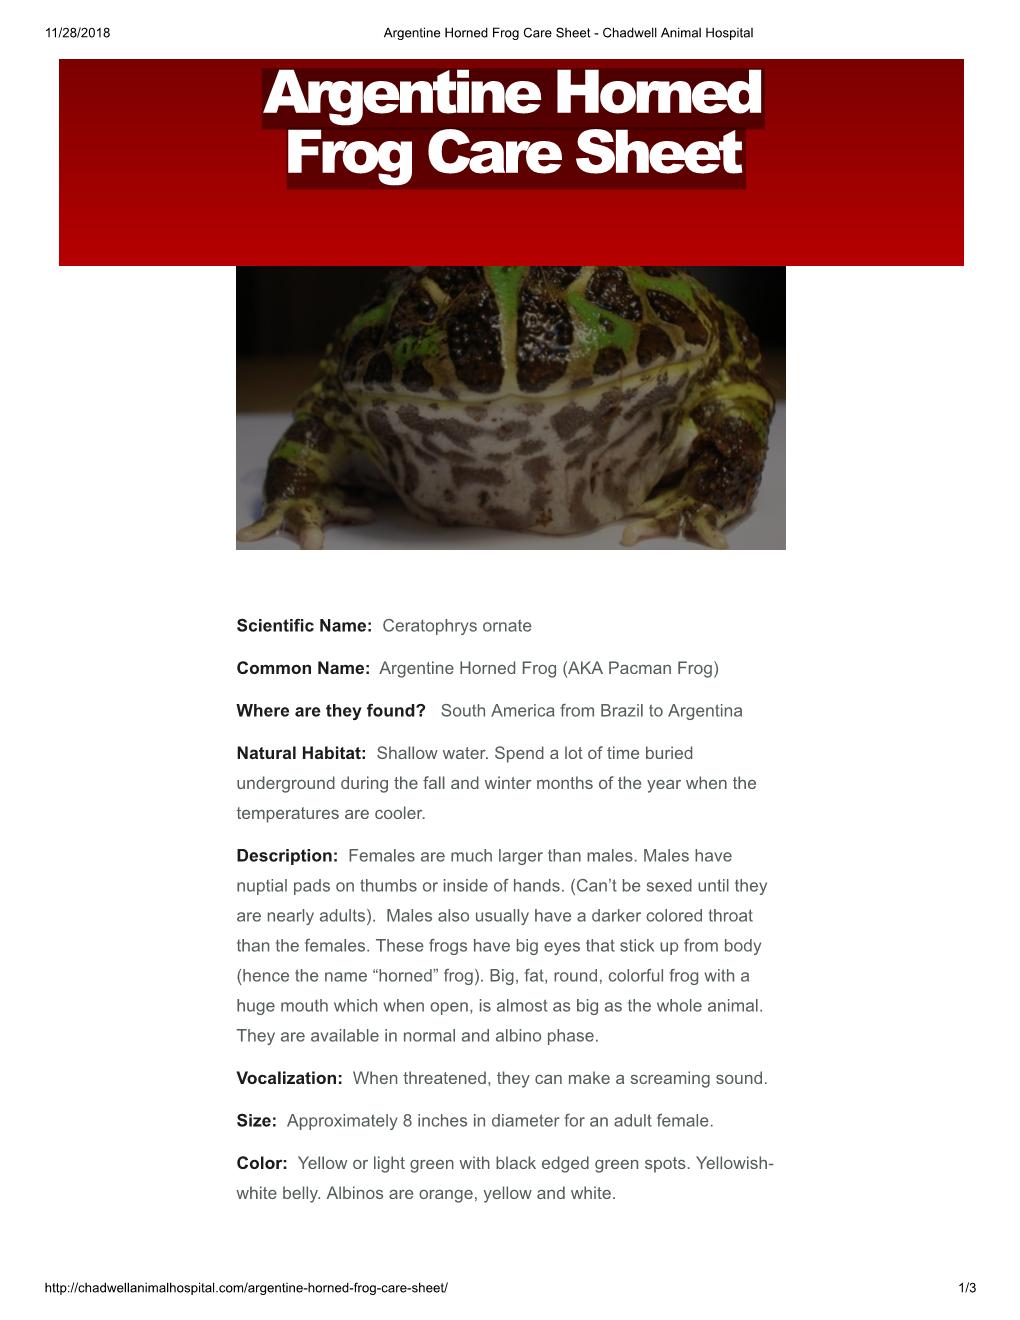 Argentine Horned Frog Care Sheet - Chadwell Animal Hospital Argentine Horned Frog Care Sheet